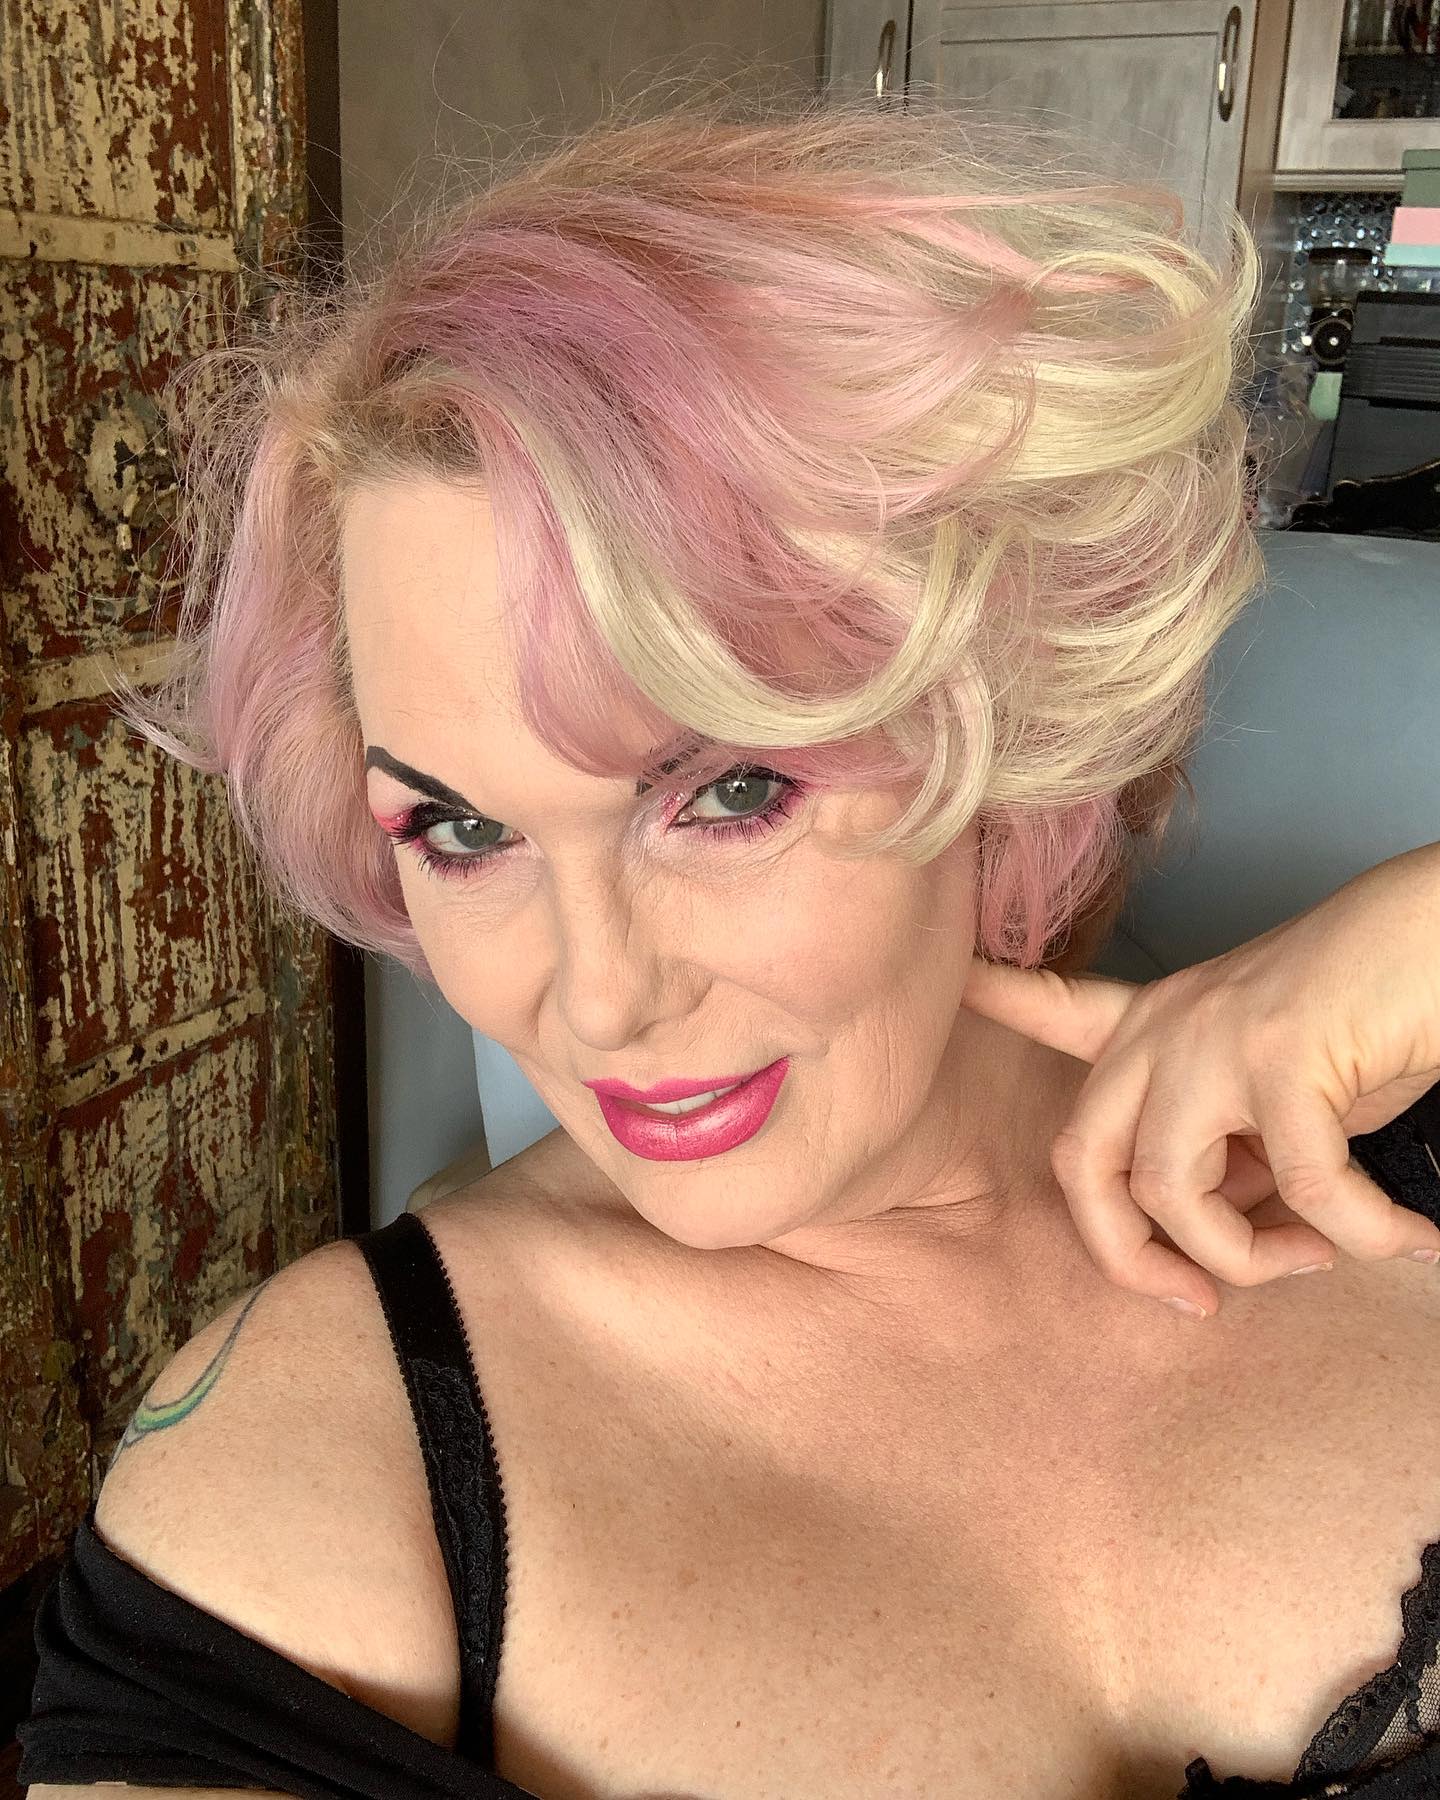 #missme oh the drama! I love the #glamourmakeup #strong and #dramatic as an #oldpunkrockerfromwayback I always #lovedit💕  and #liveitlarge #amazonstyle so without further adieu #shitsandgiggles from your fave #brokenankle #goingstircrazy #greeneyed #pinkhairdontcare #glamazon #transsexualwoman #lovinglife💞 and #livingitup #legup 😜💕🖤💕